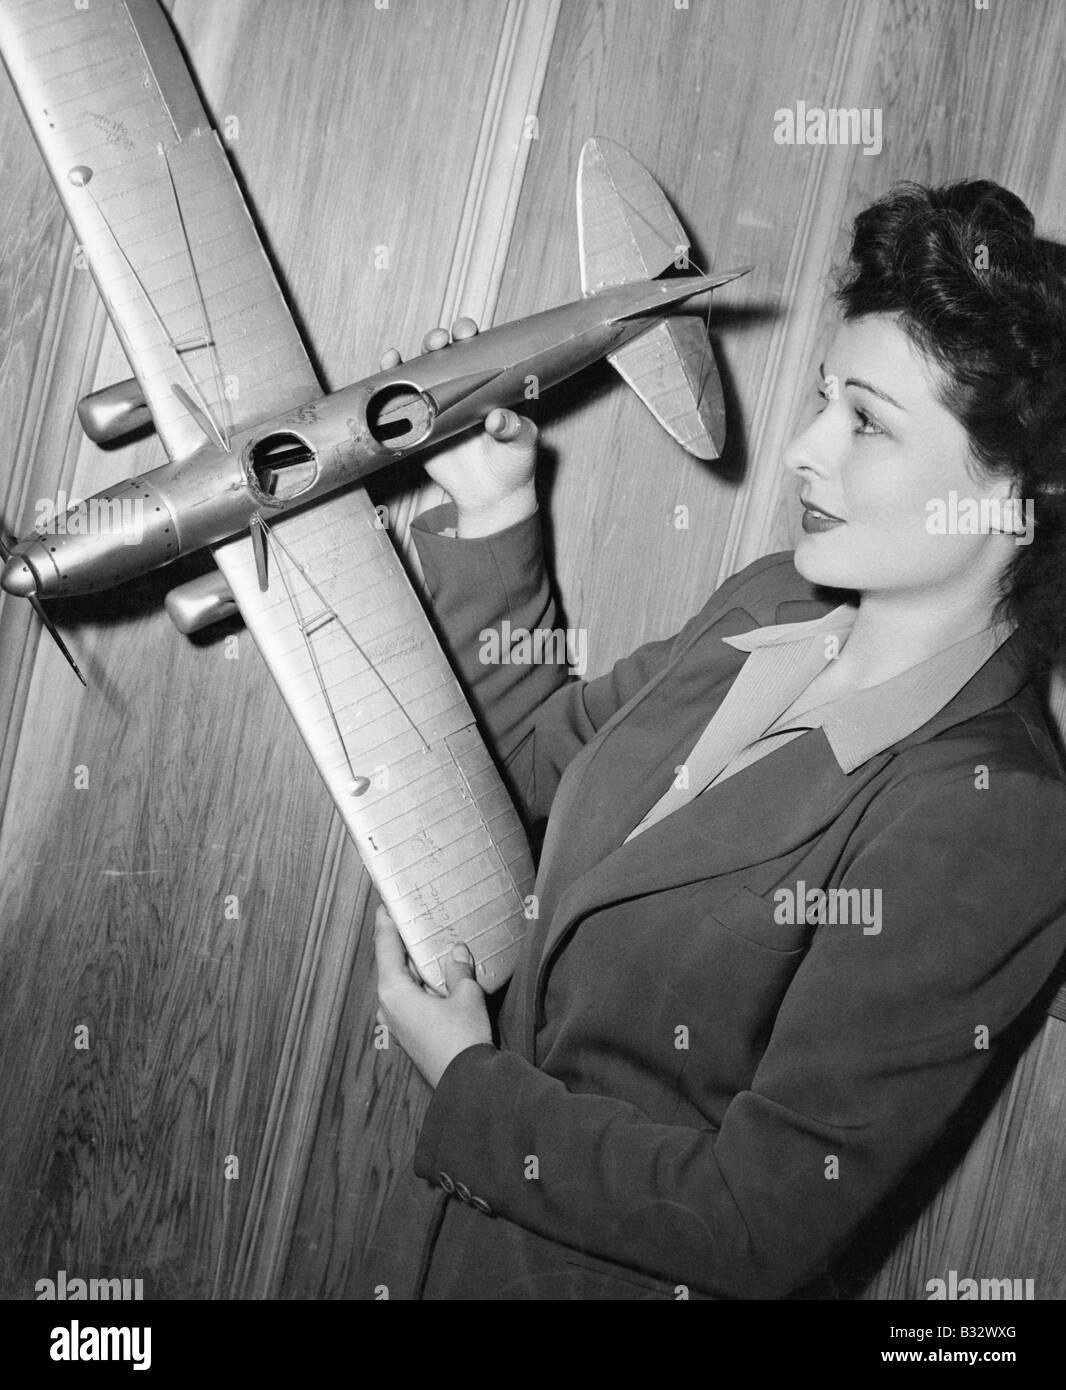 Young woman holding a model plane Stock Photo